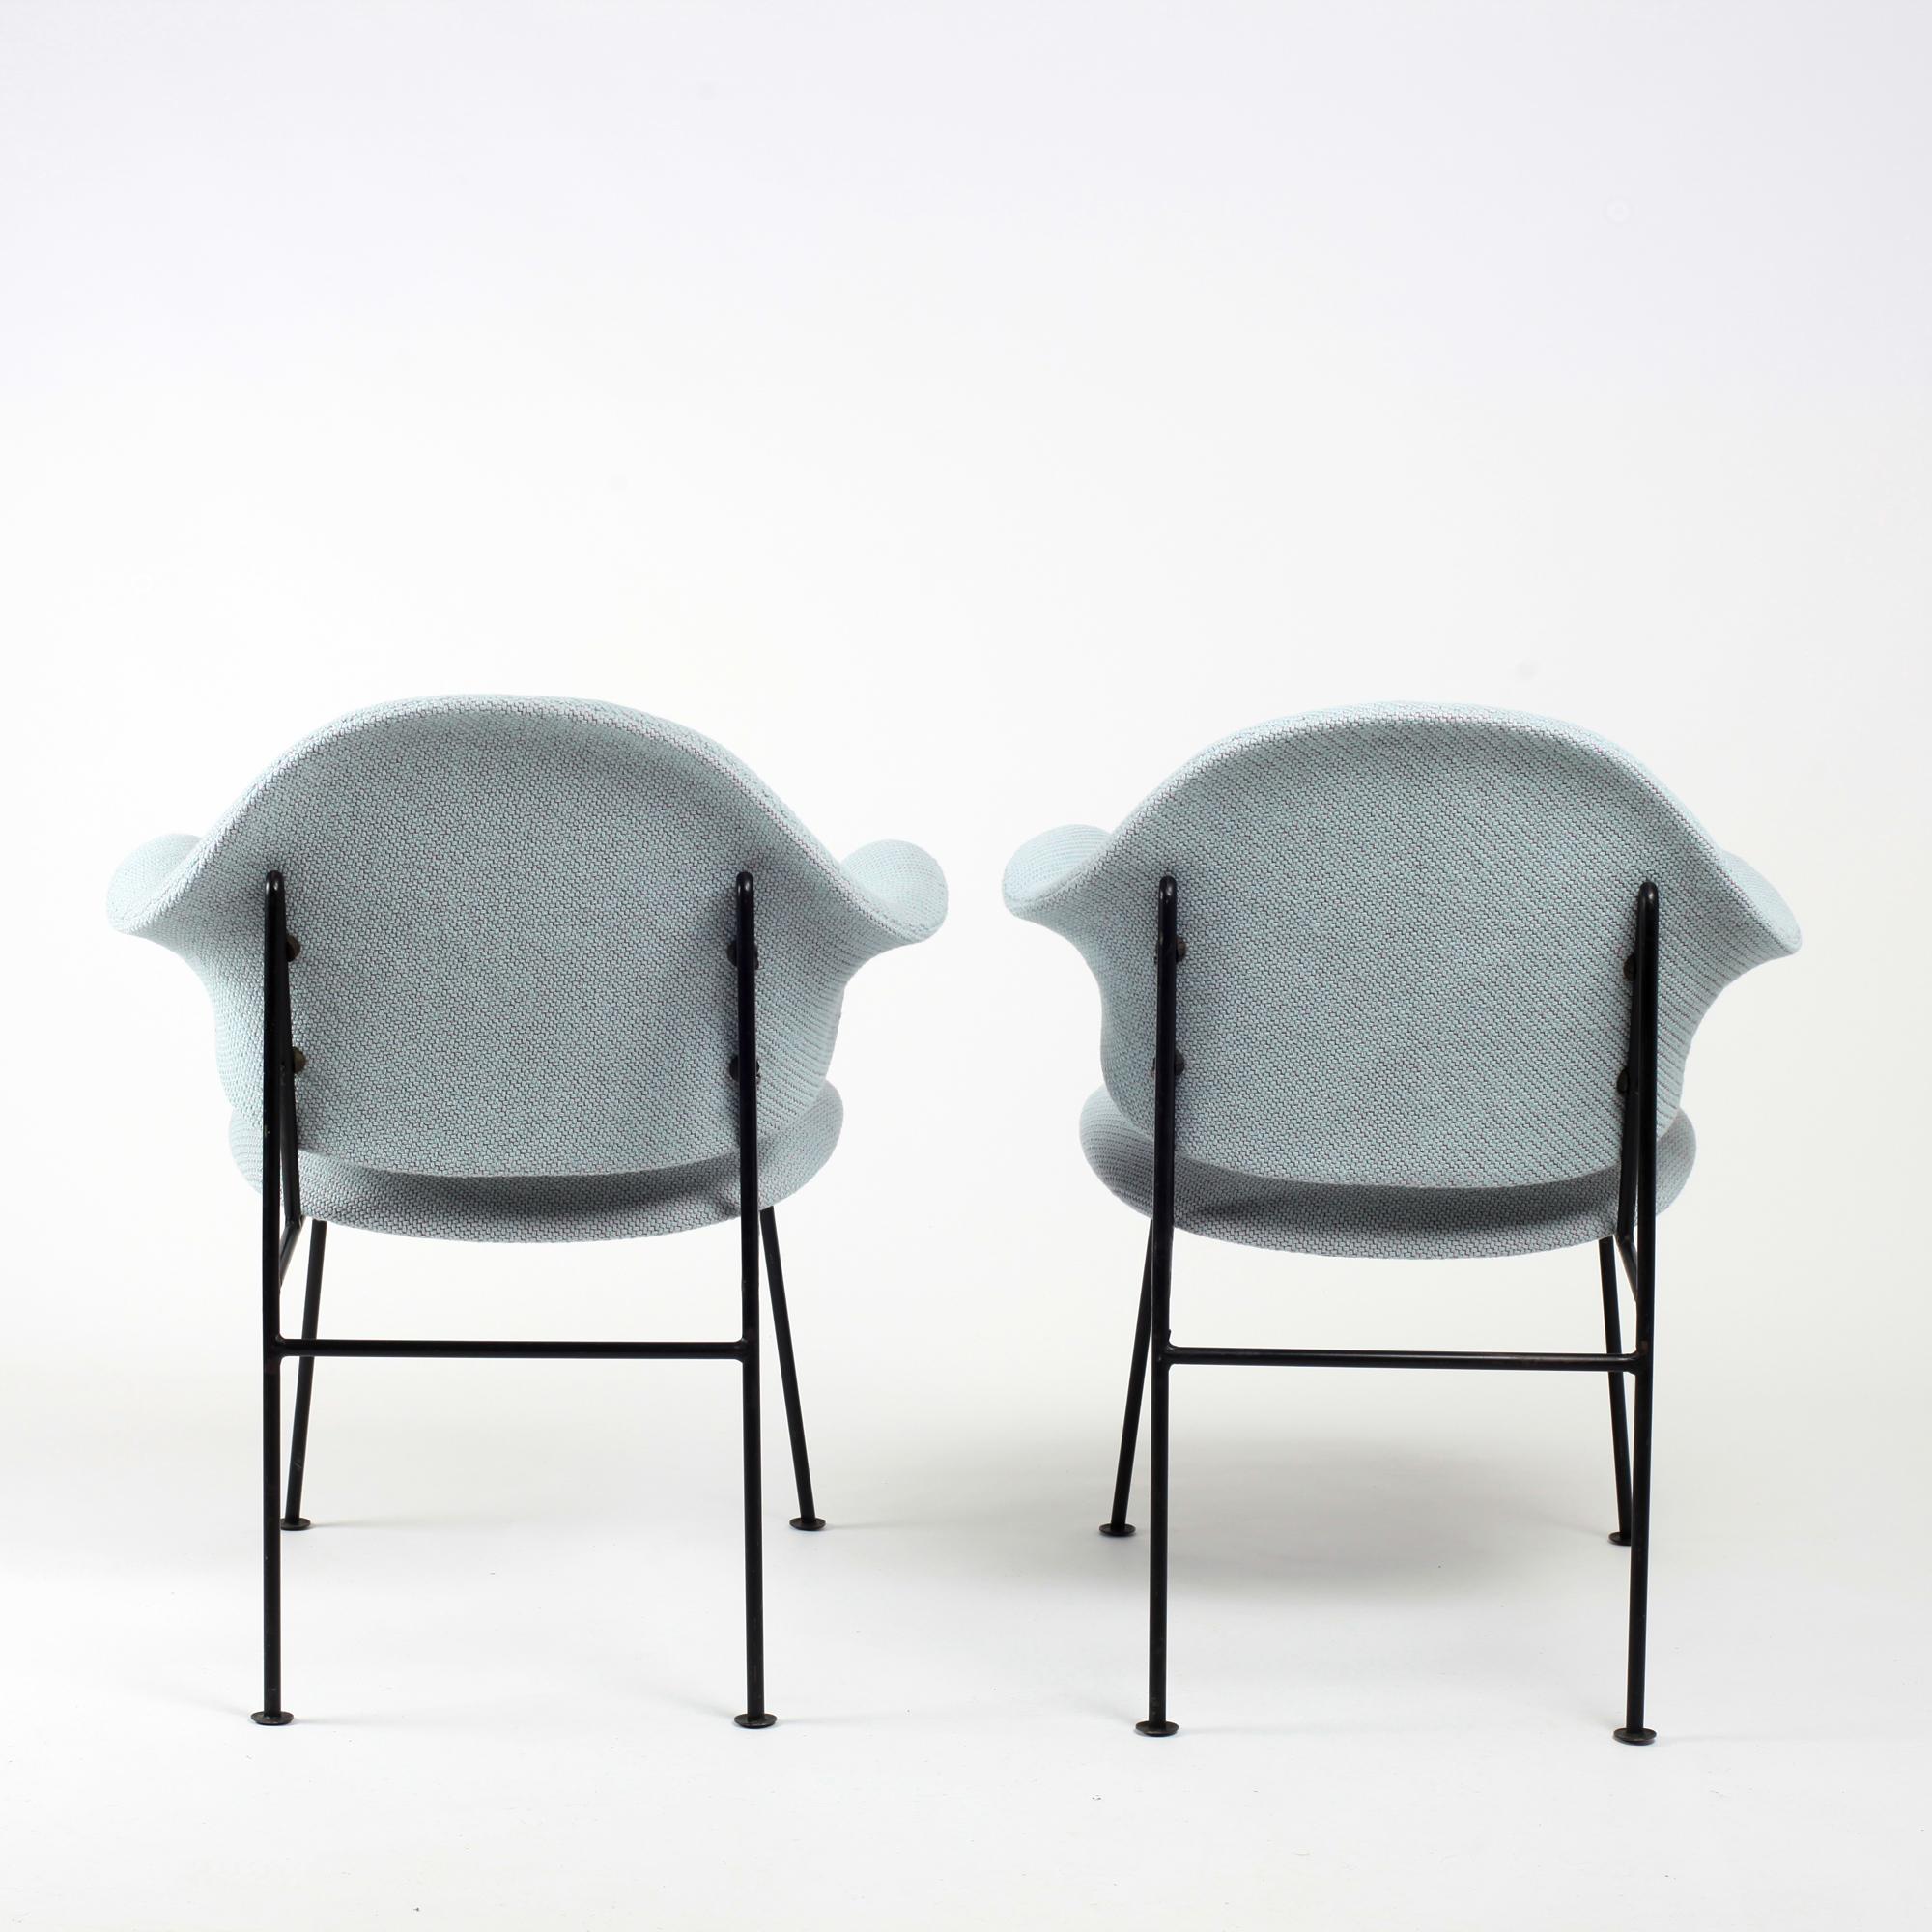 Mid-20th Century Thonet Pair of Armchairs 1950's France